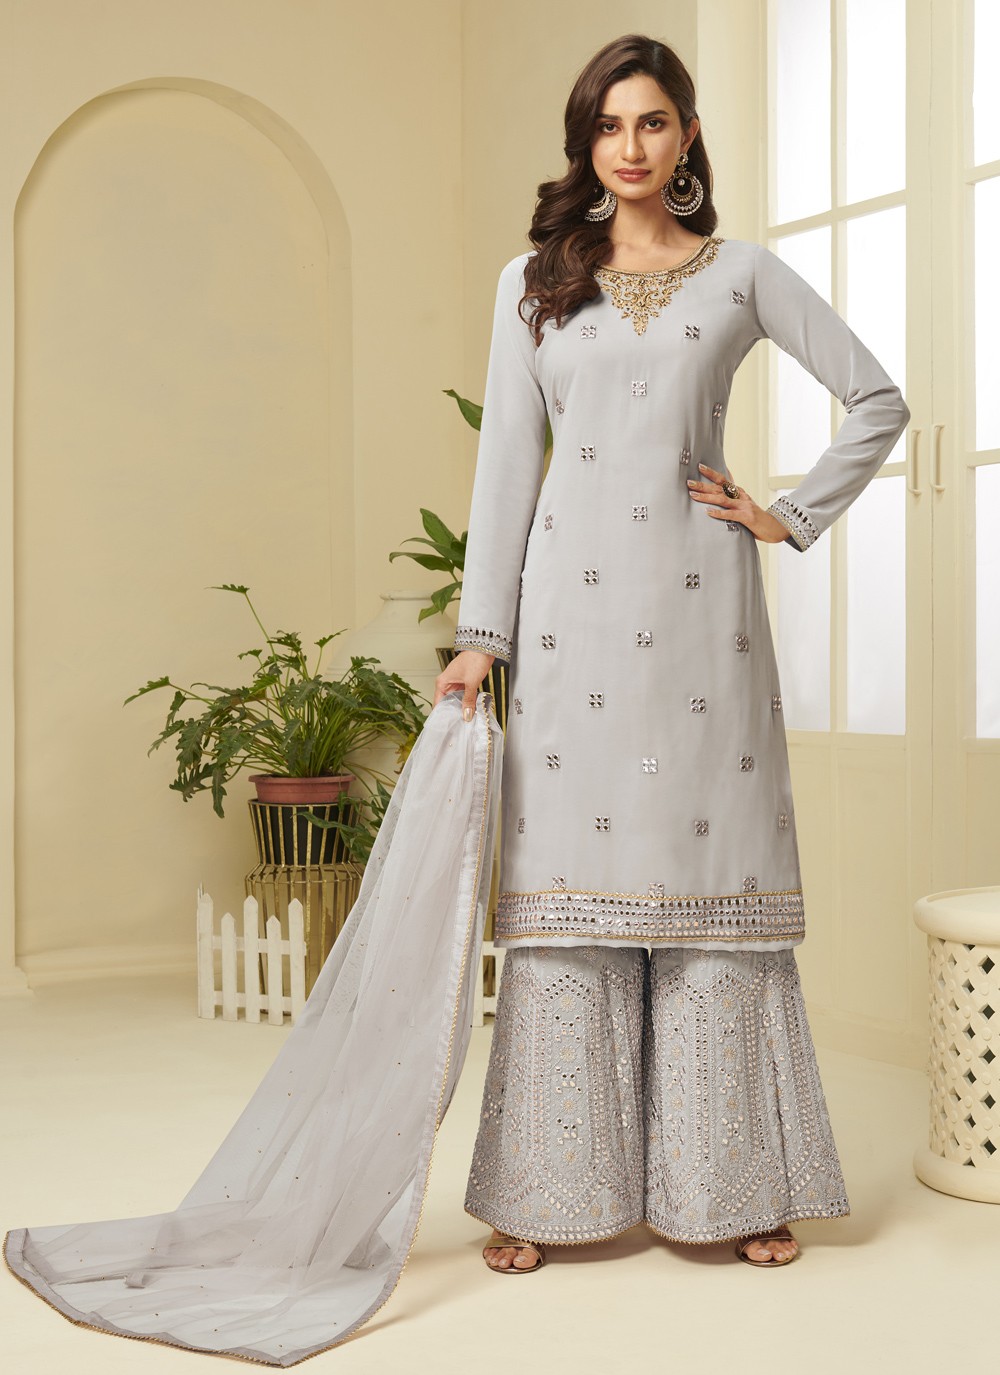 Grey Embroidered Faux Georgette Designer Palazzo Suit